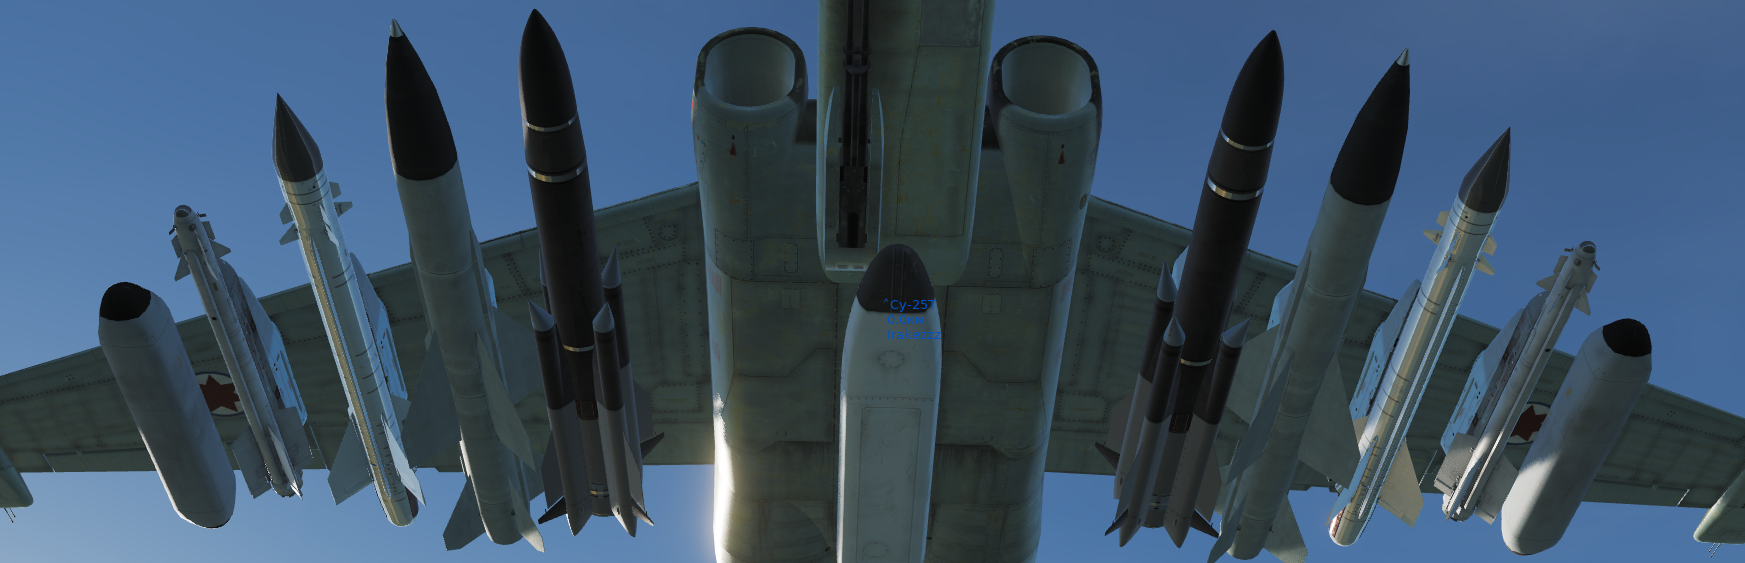 Fixed Arms Mod of the armament for the Su-25T / 27/33, MiG-29S, F-15C aircraft For the R-33 missile, an aiming signal with launch permission on real flight parameters will be displayed on the HUD.